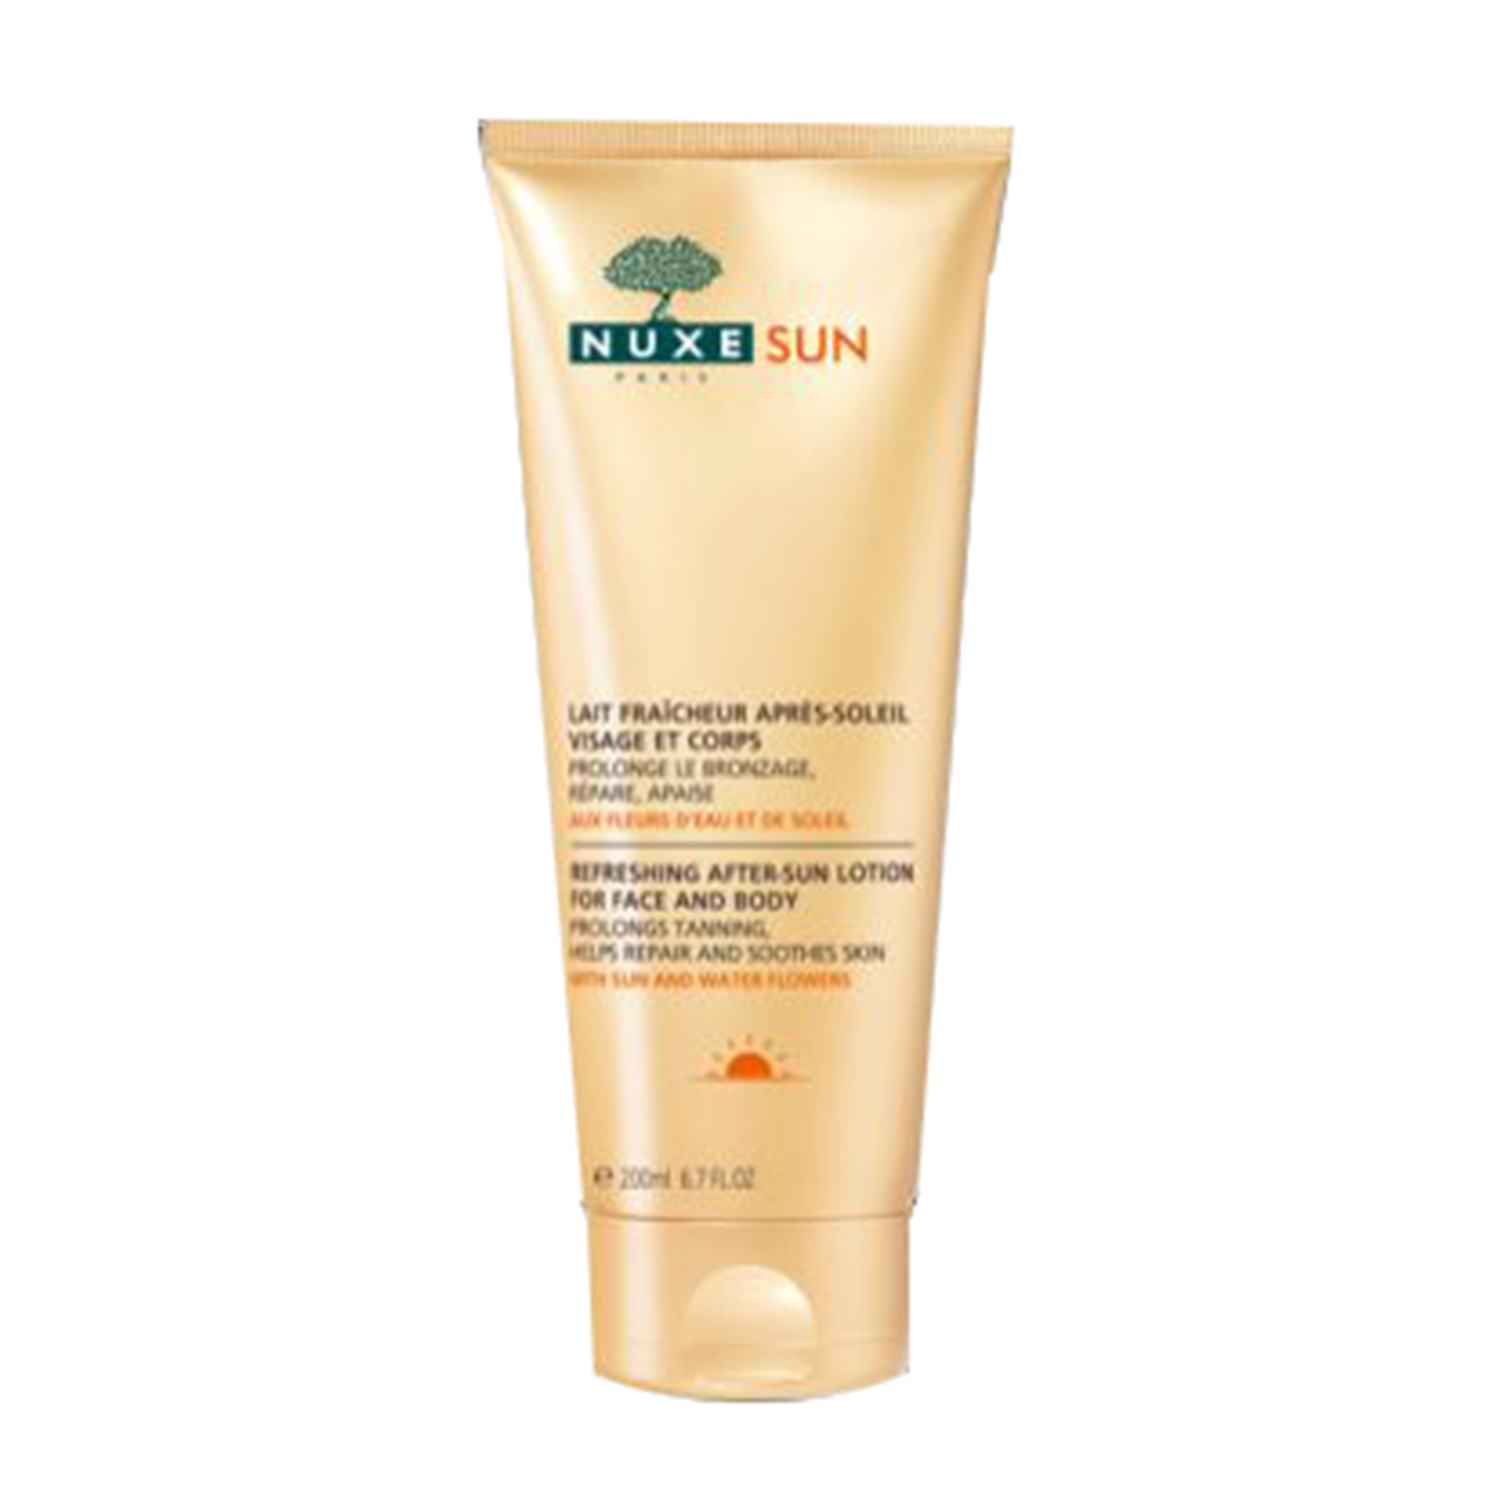 Nuxe Sun Refreshing Aftersun Lotion Aftersun Lotion 200 ml